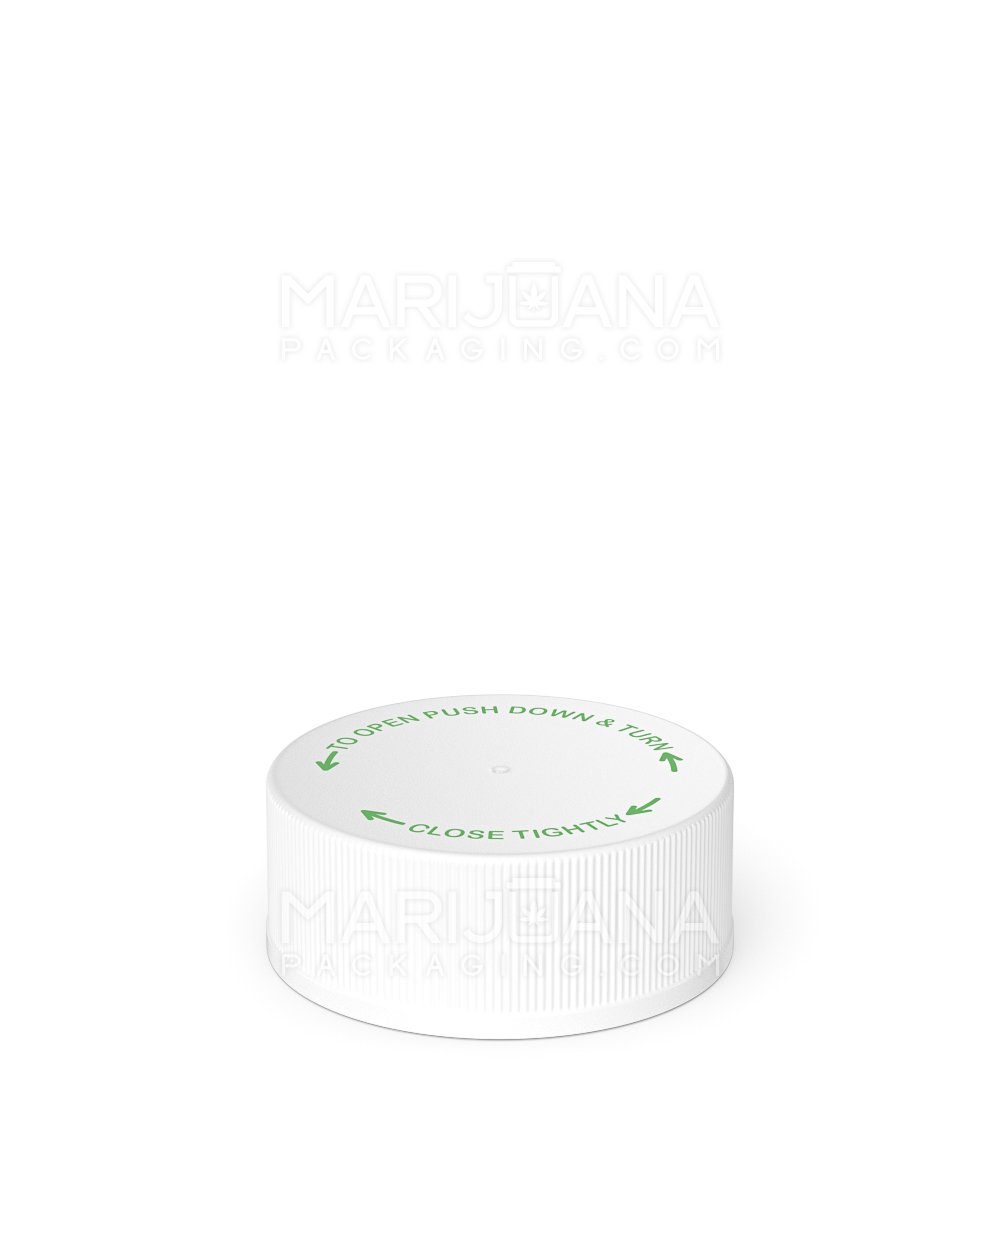 Child Resistant | Ribbed Push Down & Turn Plastic Caps w/ Text & Foam Liner | 38mm - Semi Gloss White - 320 Count - 3